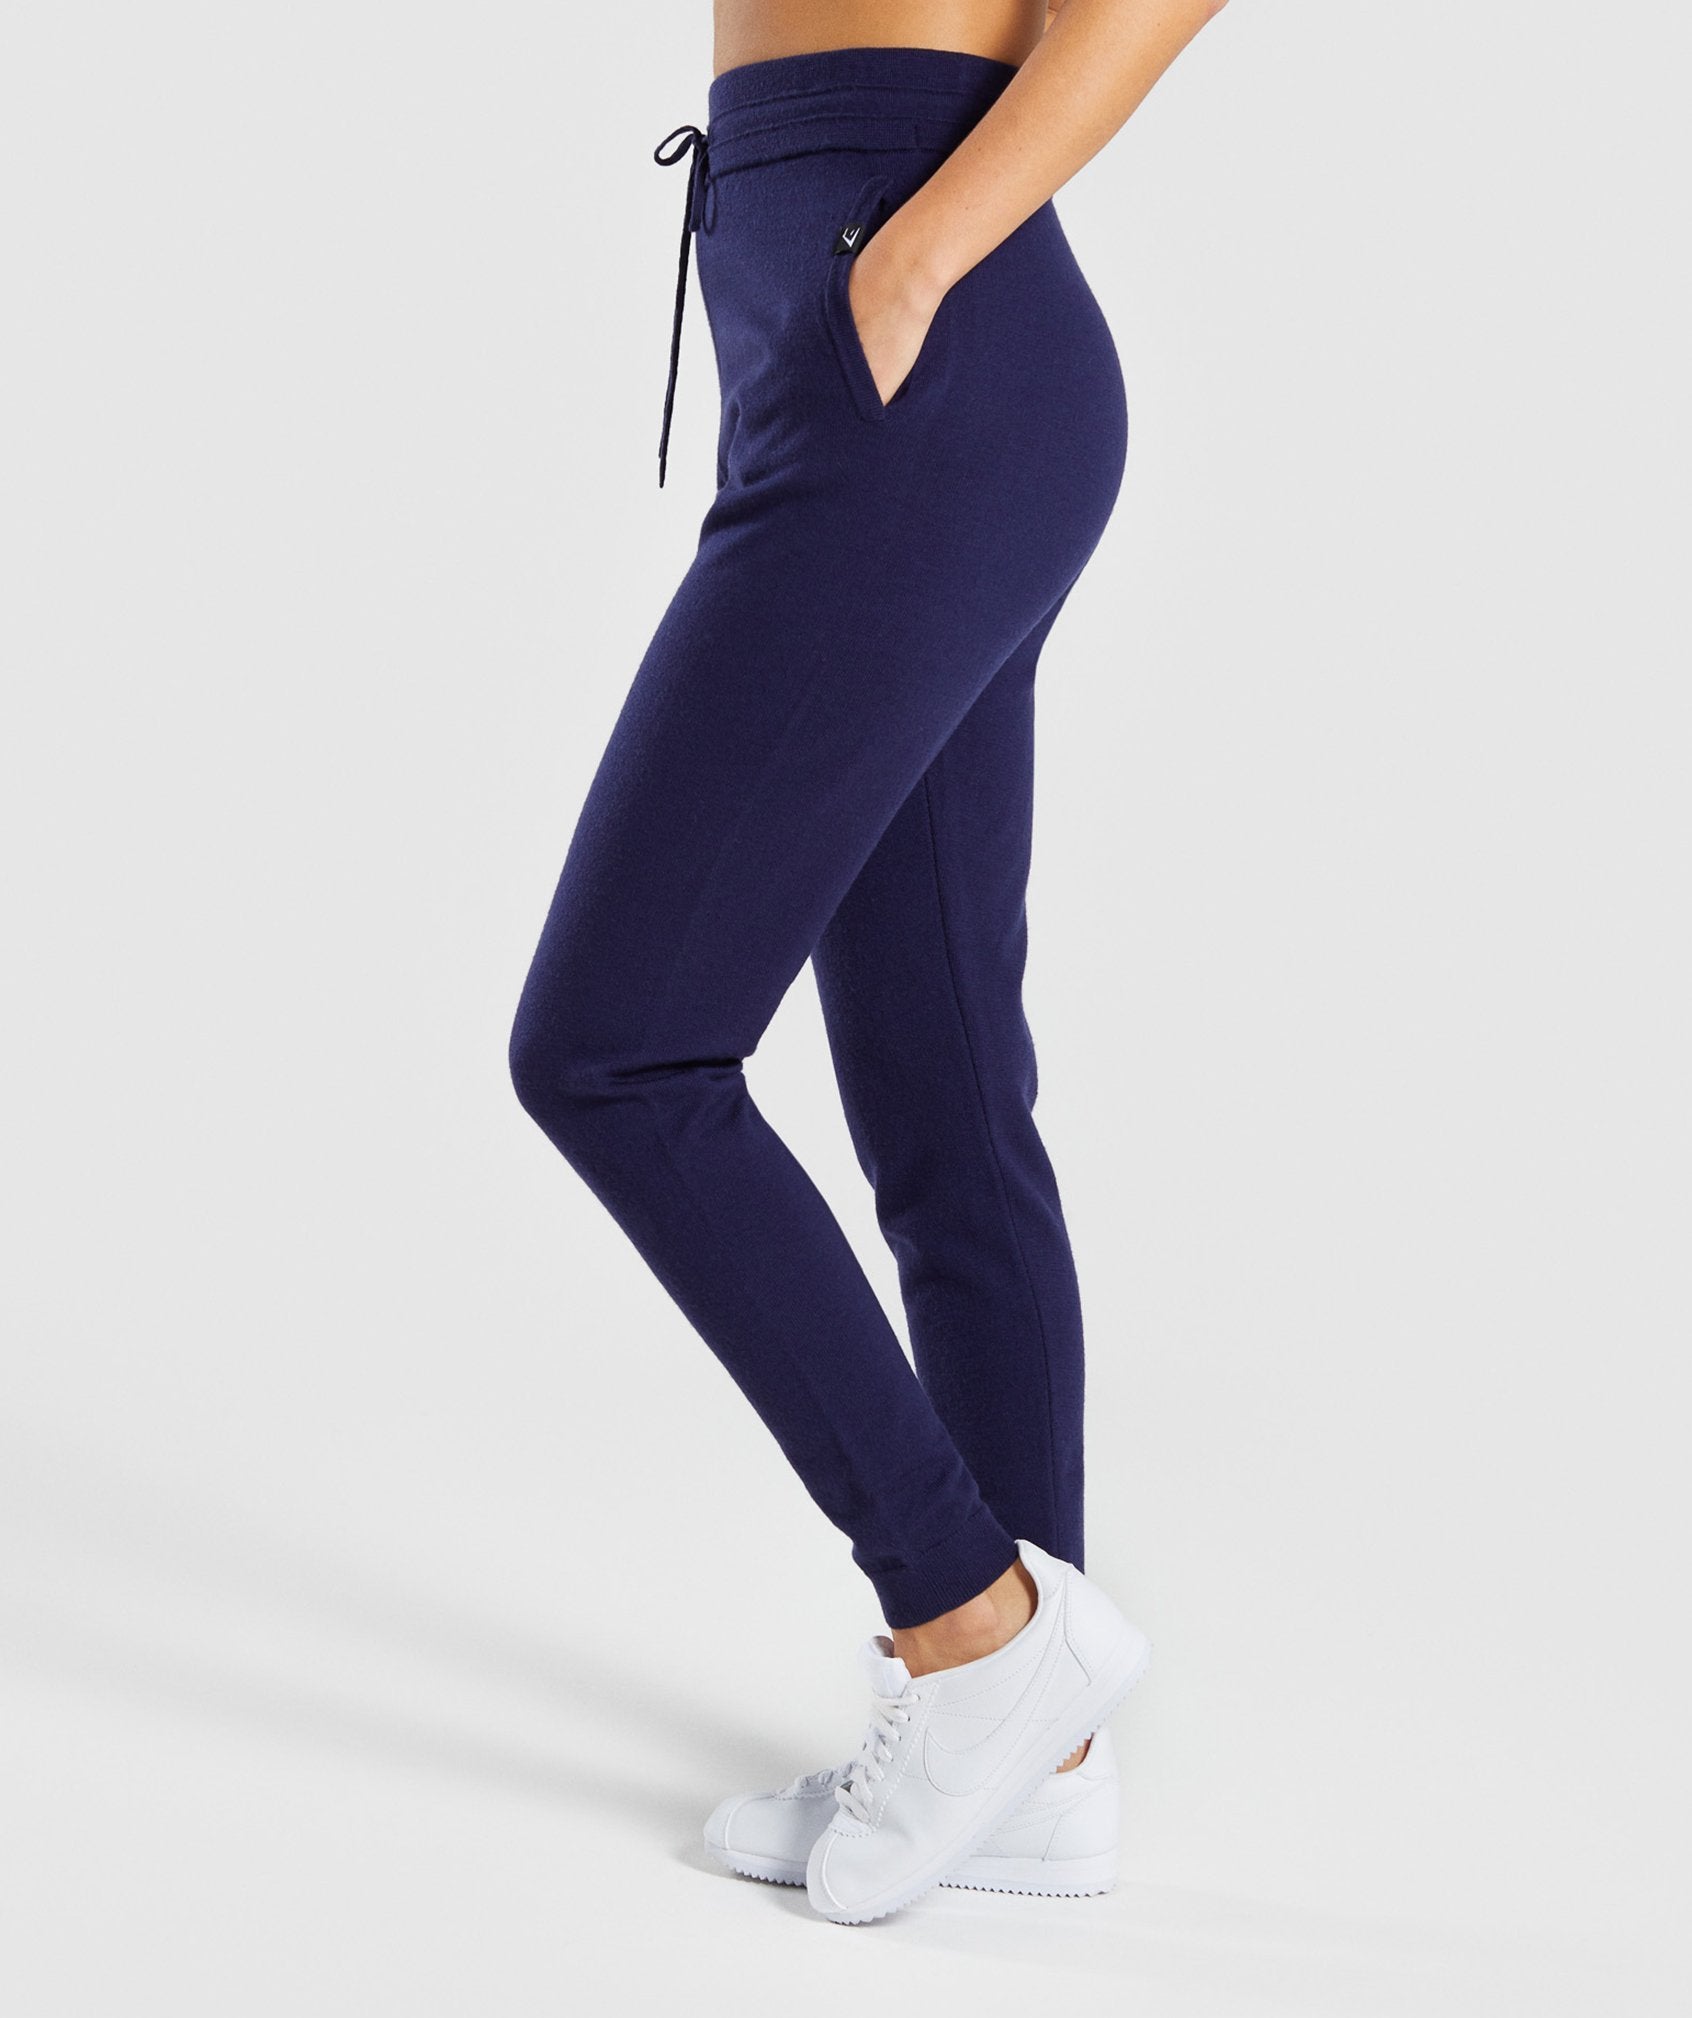 Isla Knit Jogger in Evening Navy Blue - view 3